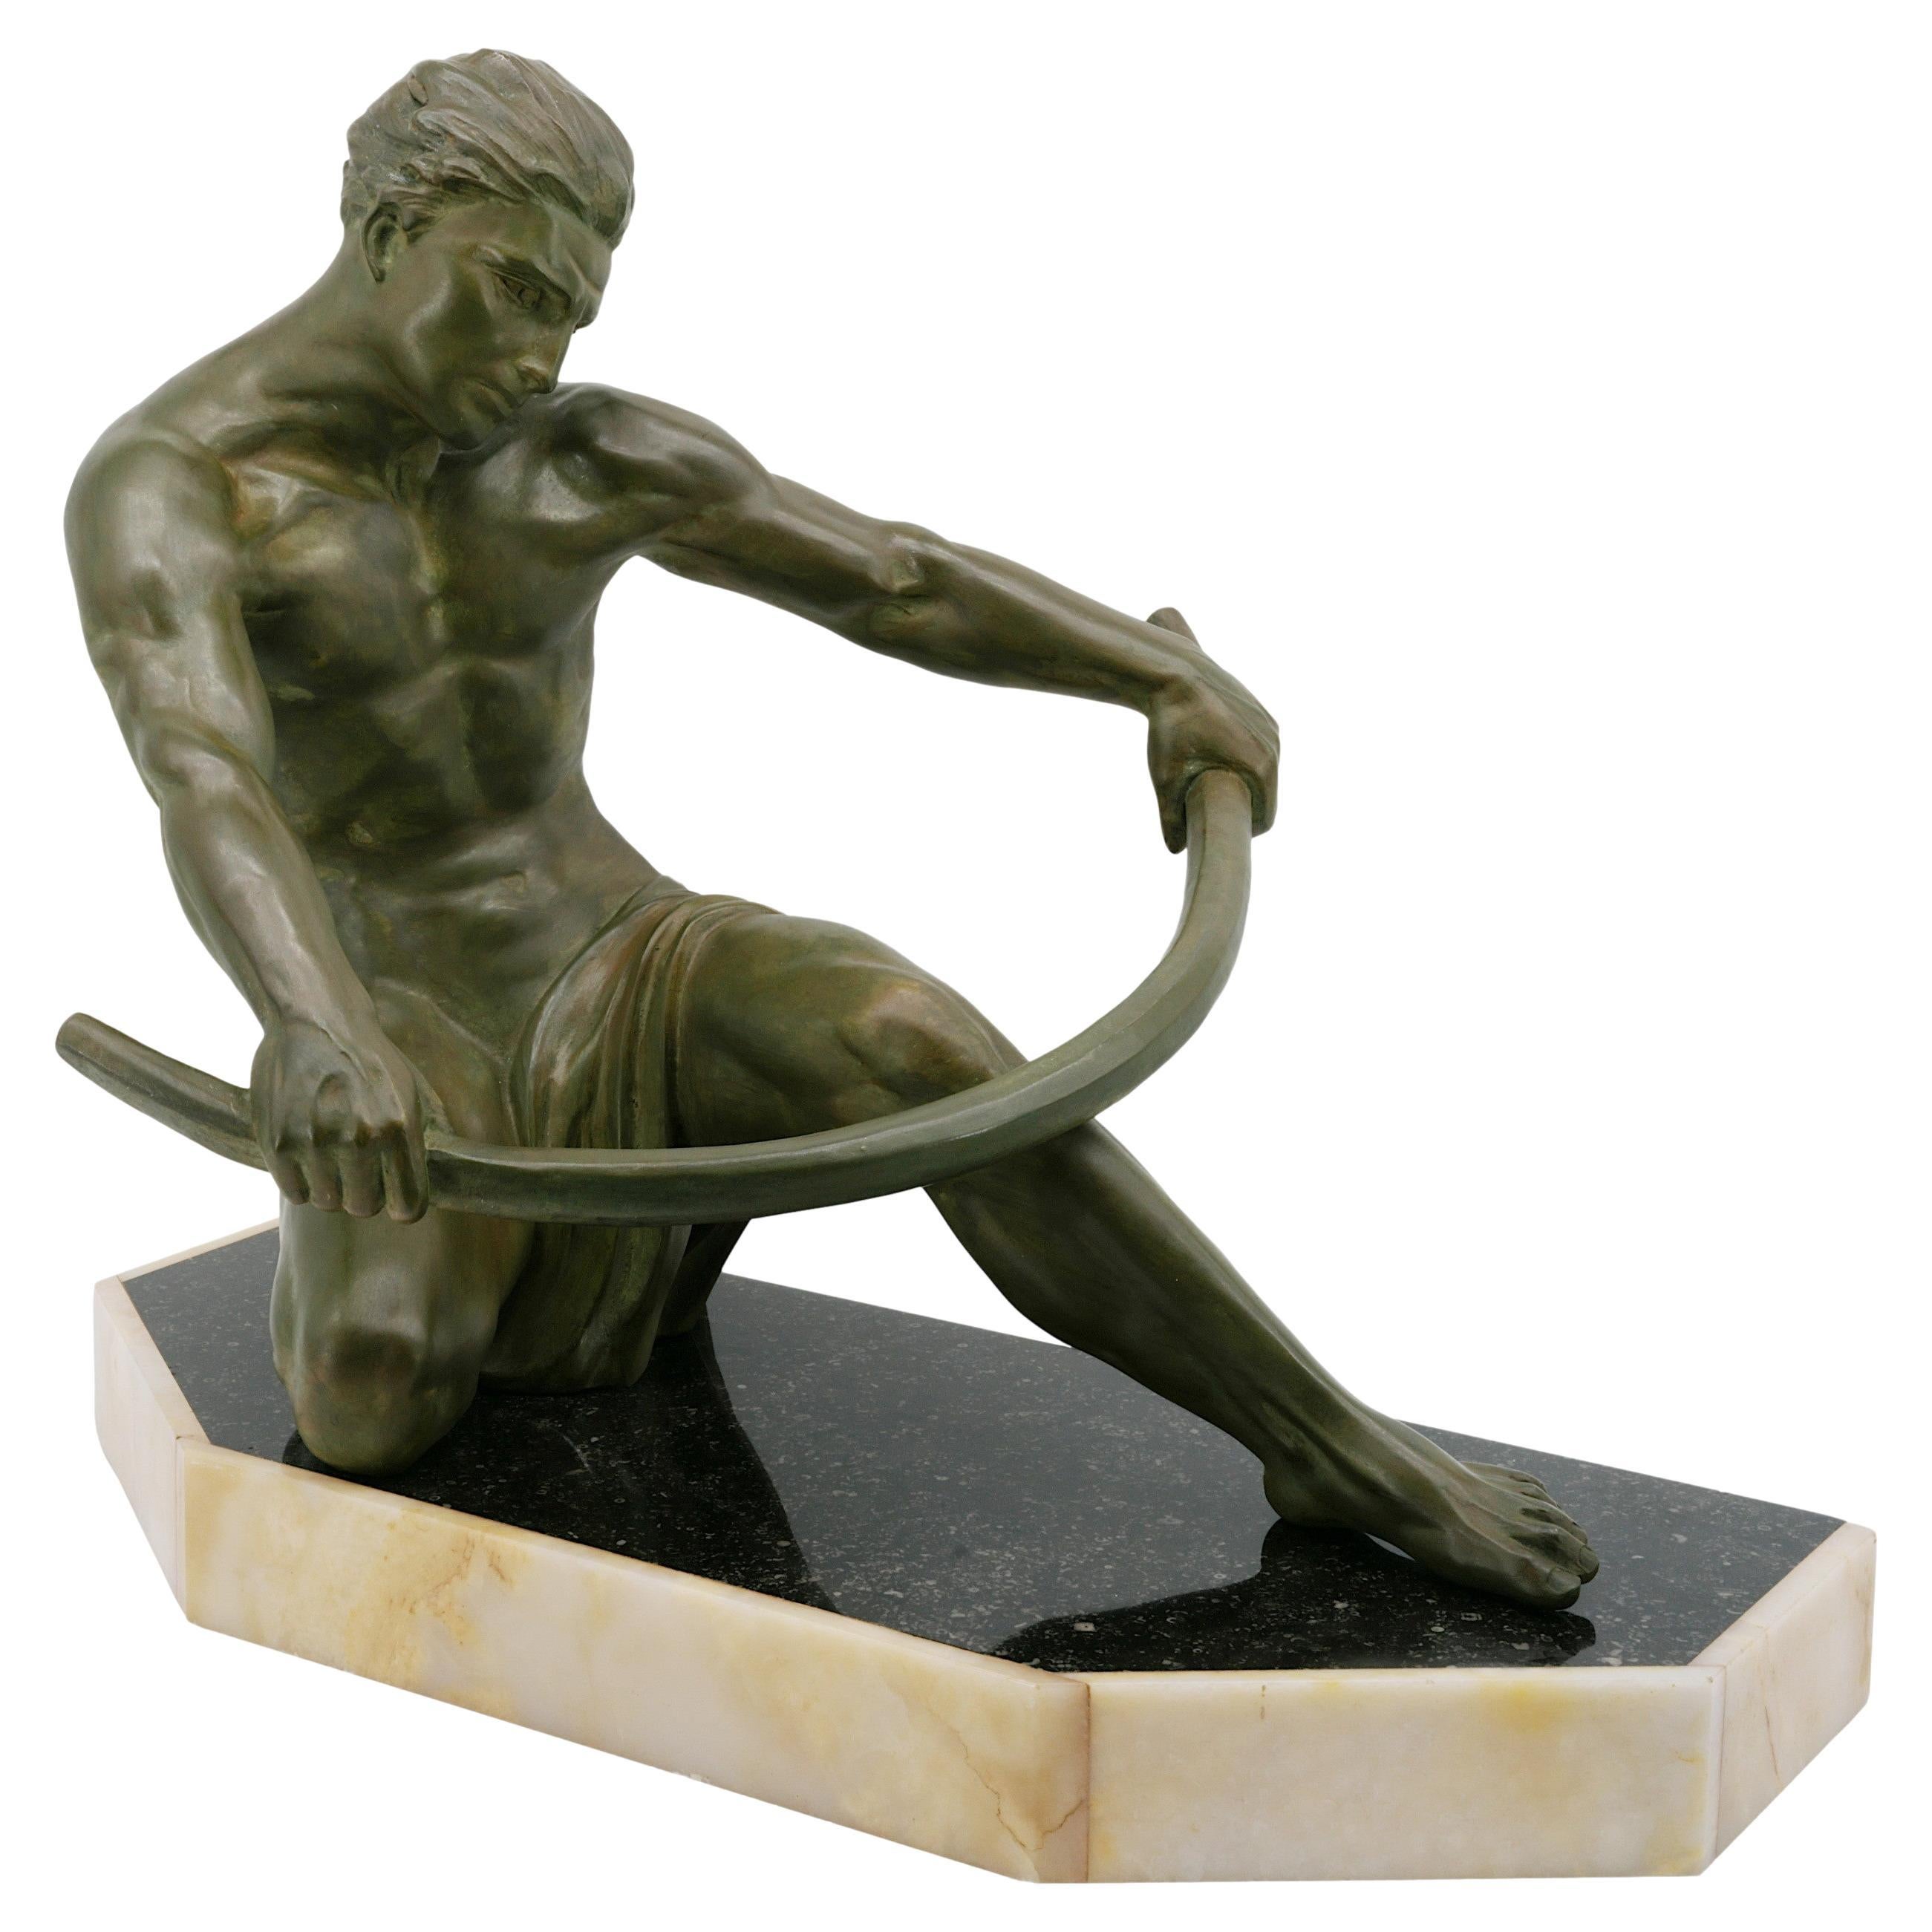 French Art Deco man sculpture, France, circa 1925. Spelter, marble & onyx. Width : 21.25